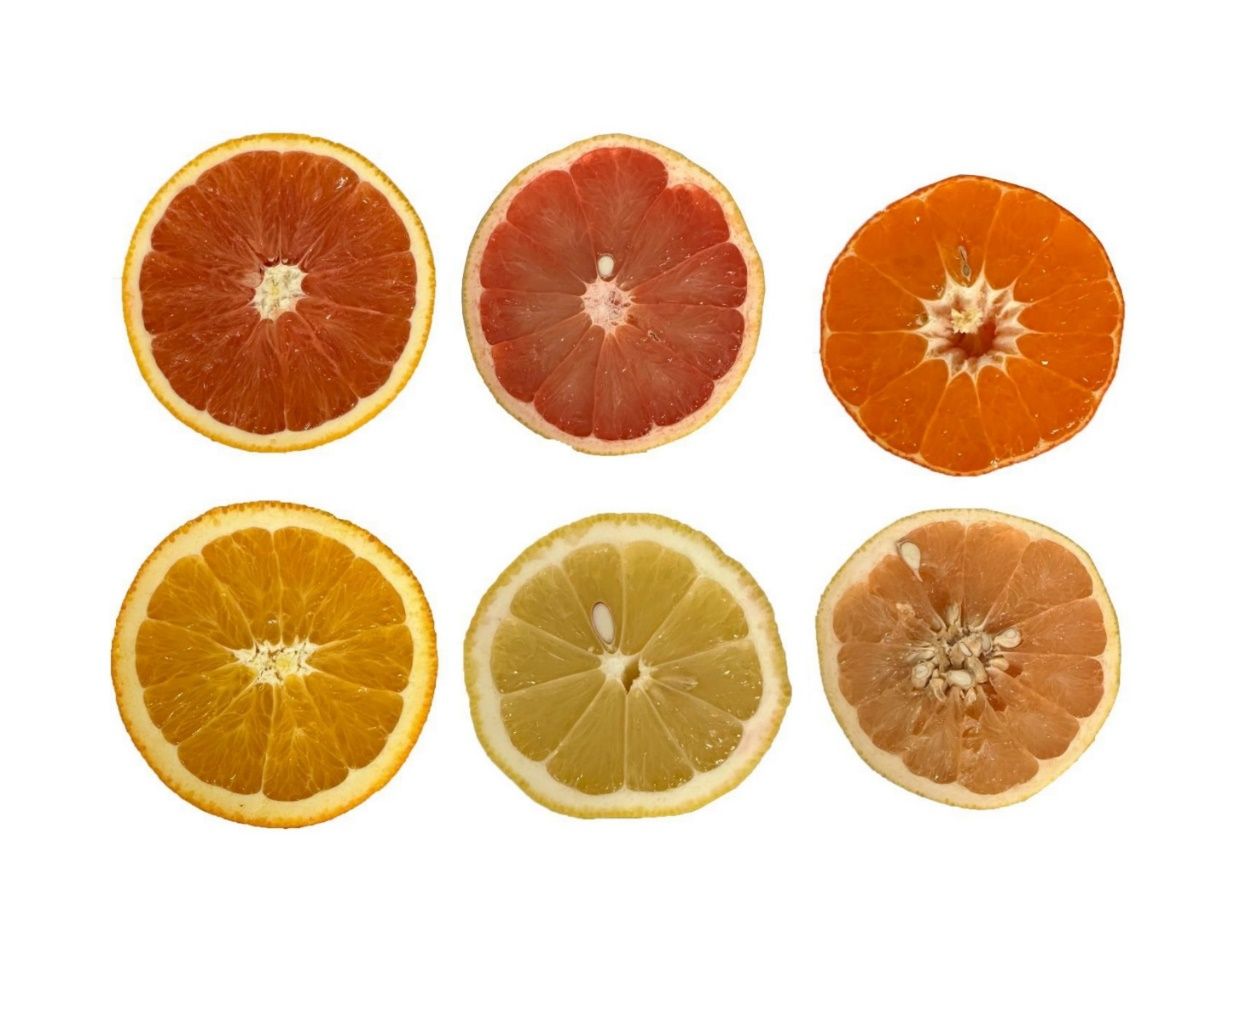 The range of colors in the flesh of mature citrus fruit due to different compositions of carotenoids. Top from left to right: ‘Cara Cara’ navel orange, ‘Ruby Red’ grapefruit, and ‘Satsuma’ mandarin. Bottom from left to right: ‘Washington Navel’ orange, ‘Lisbon’ lemon, and ‘Marsh’ grapefruit.